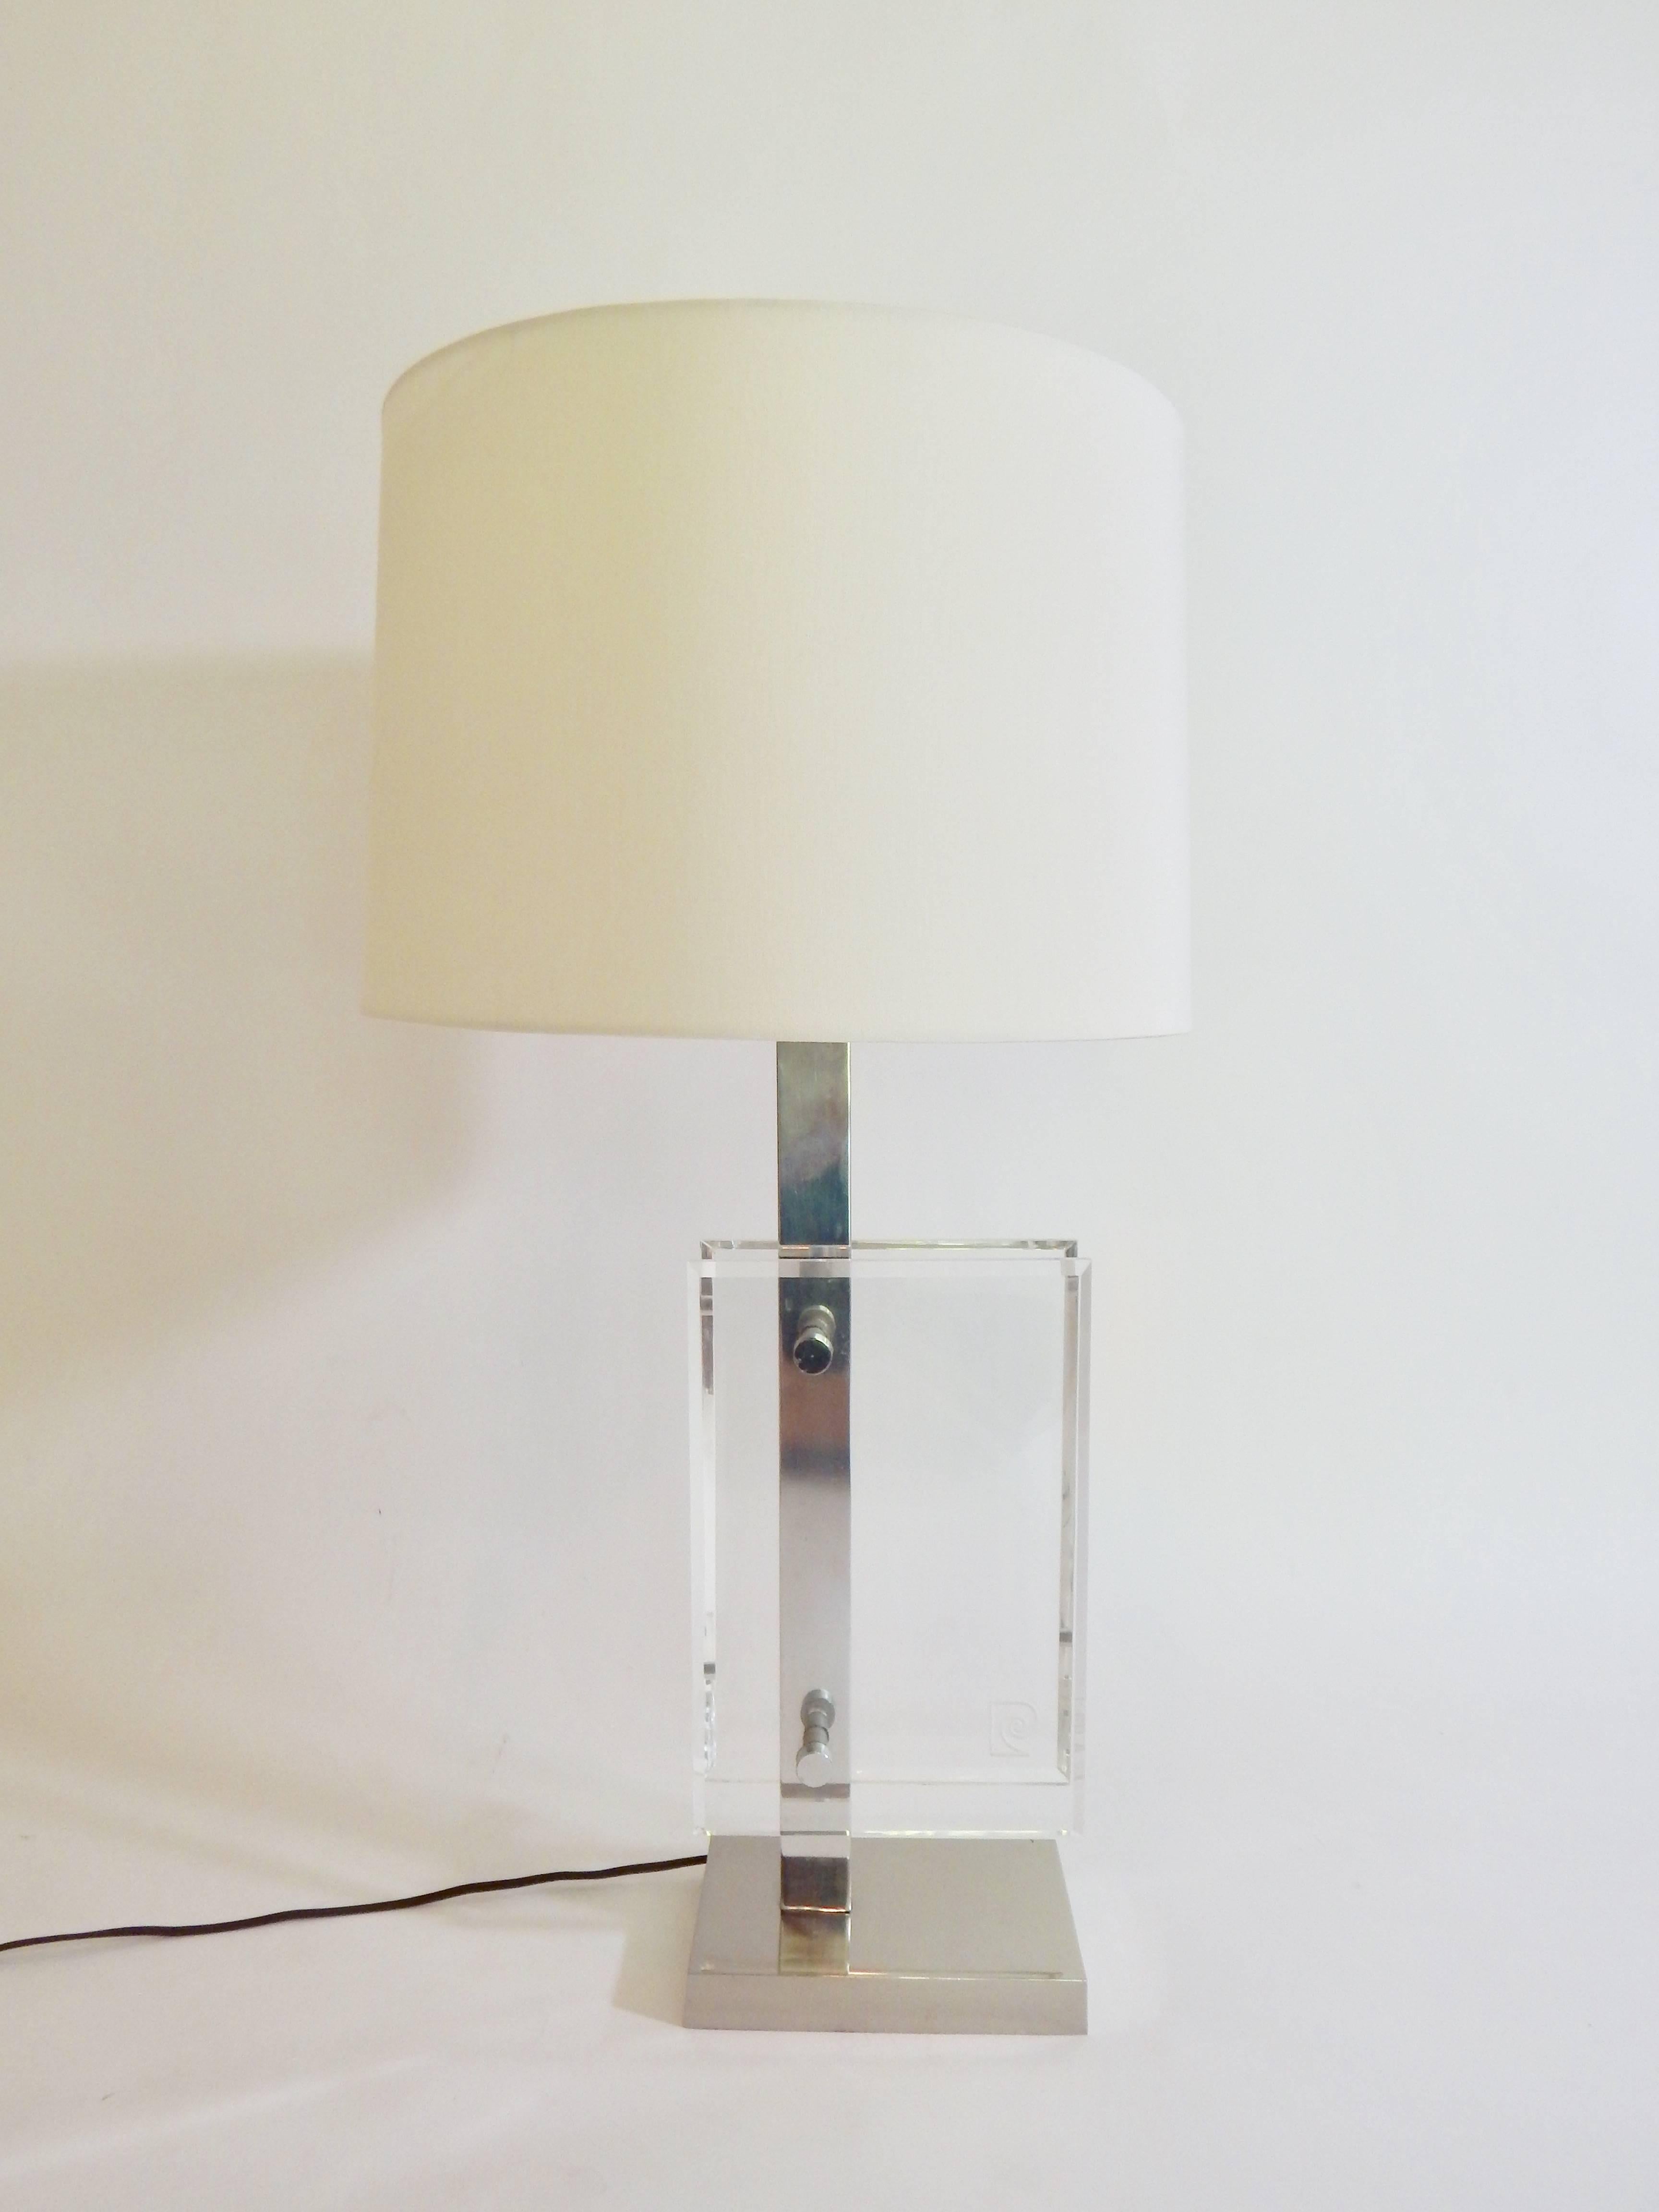 PIERRE CARDIN Signed Lucite Table Lamp Mid Century Modern For Sale 6